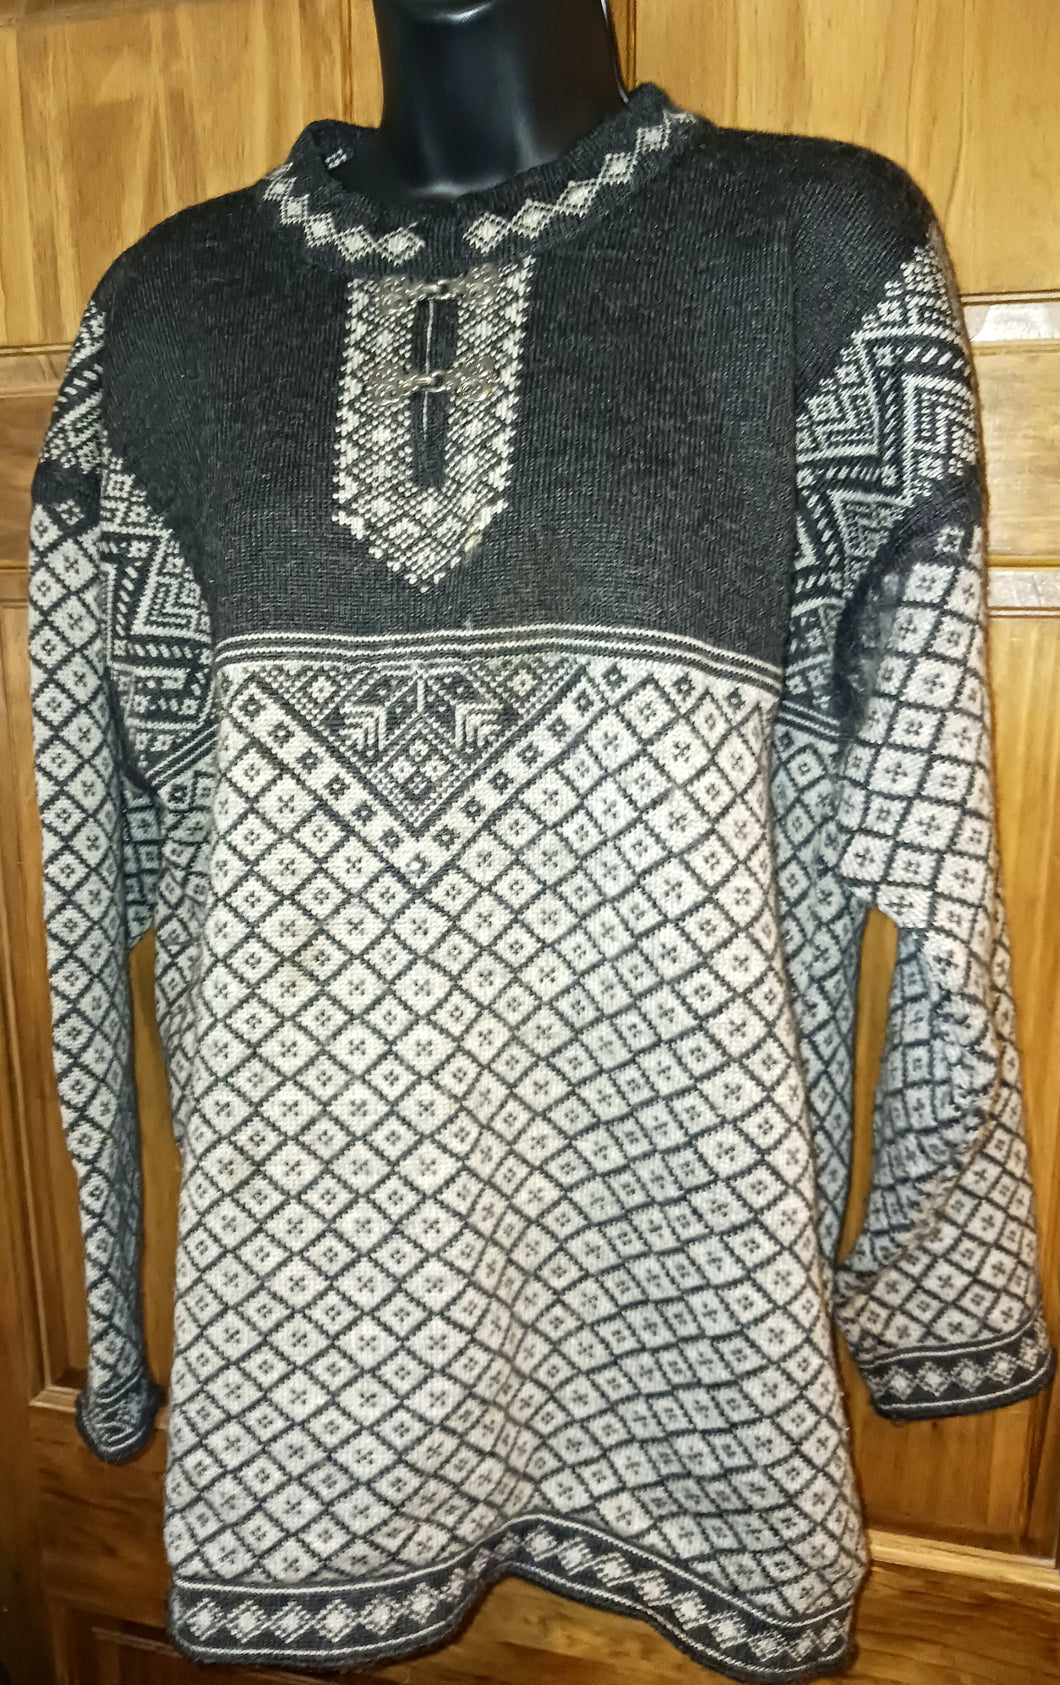 Dale of Norway Pure New Wool Women's Classic Sweater Size Large Black and Silver Geometric Designs Metal Clasp Fasteners